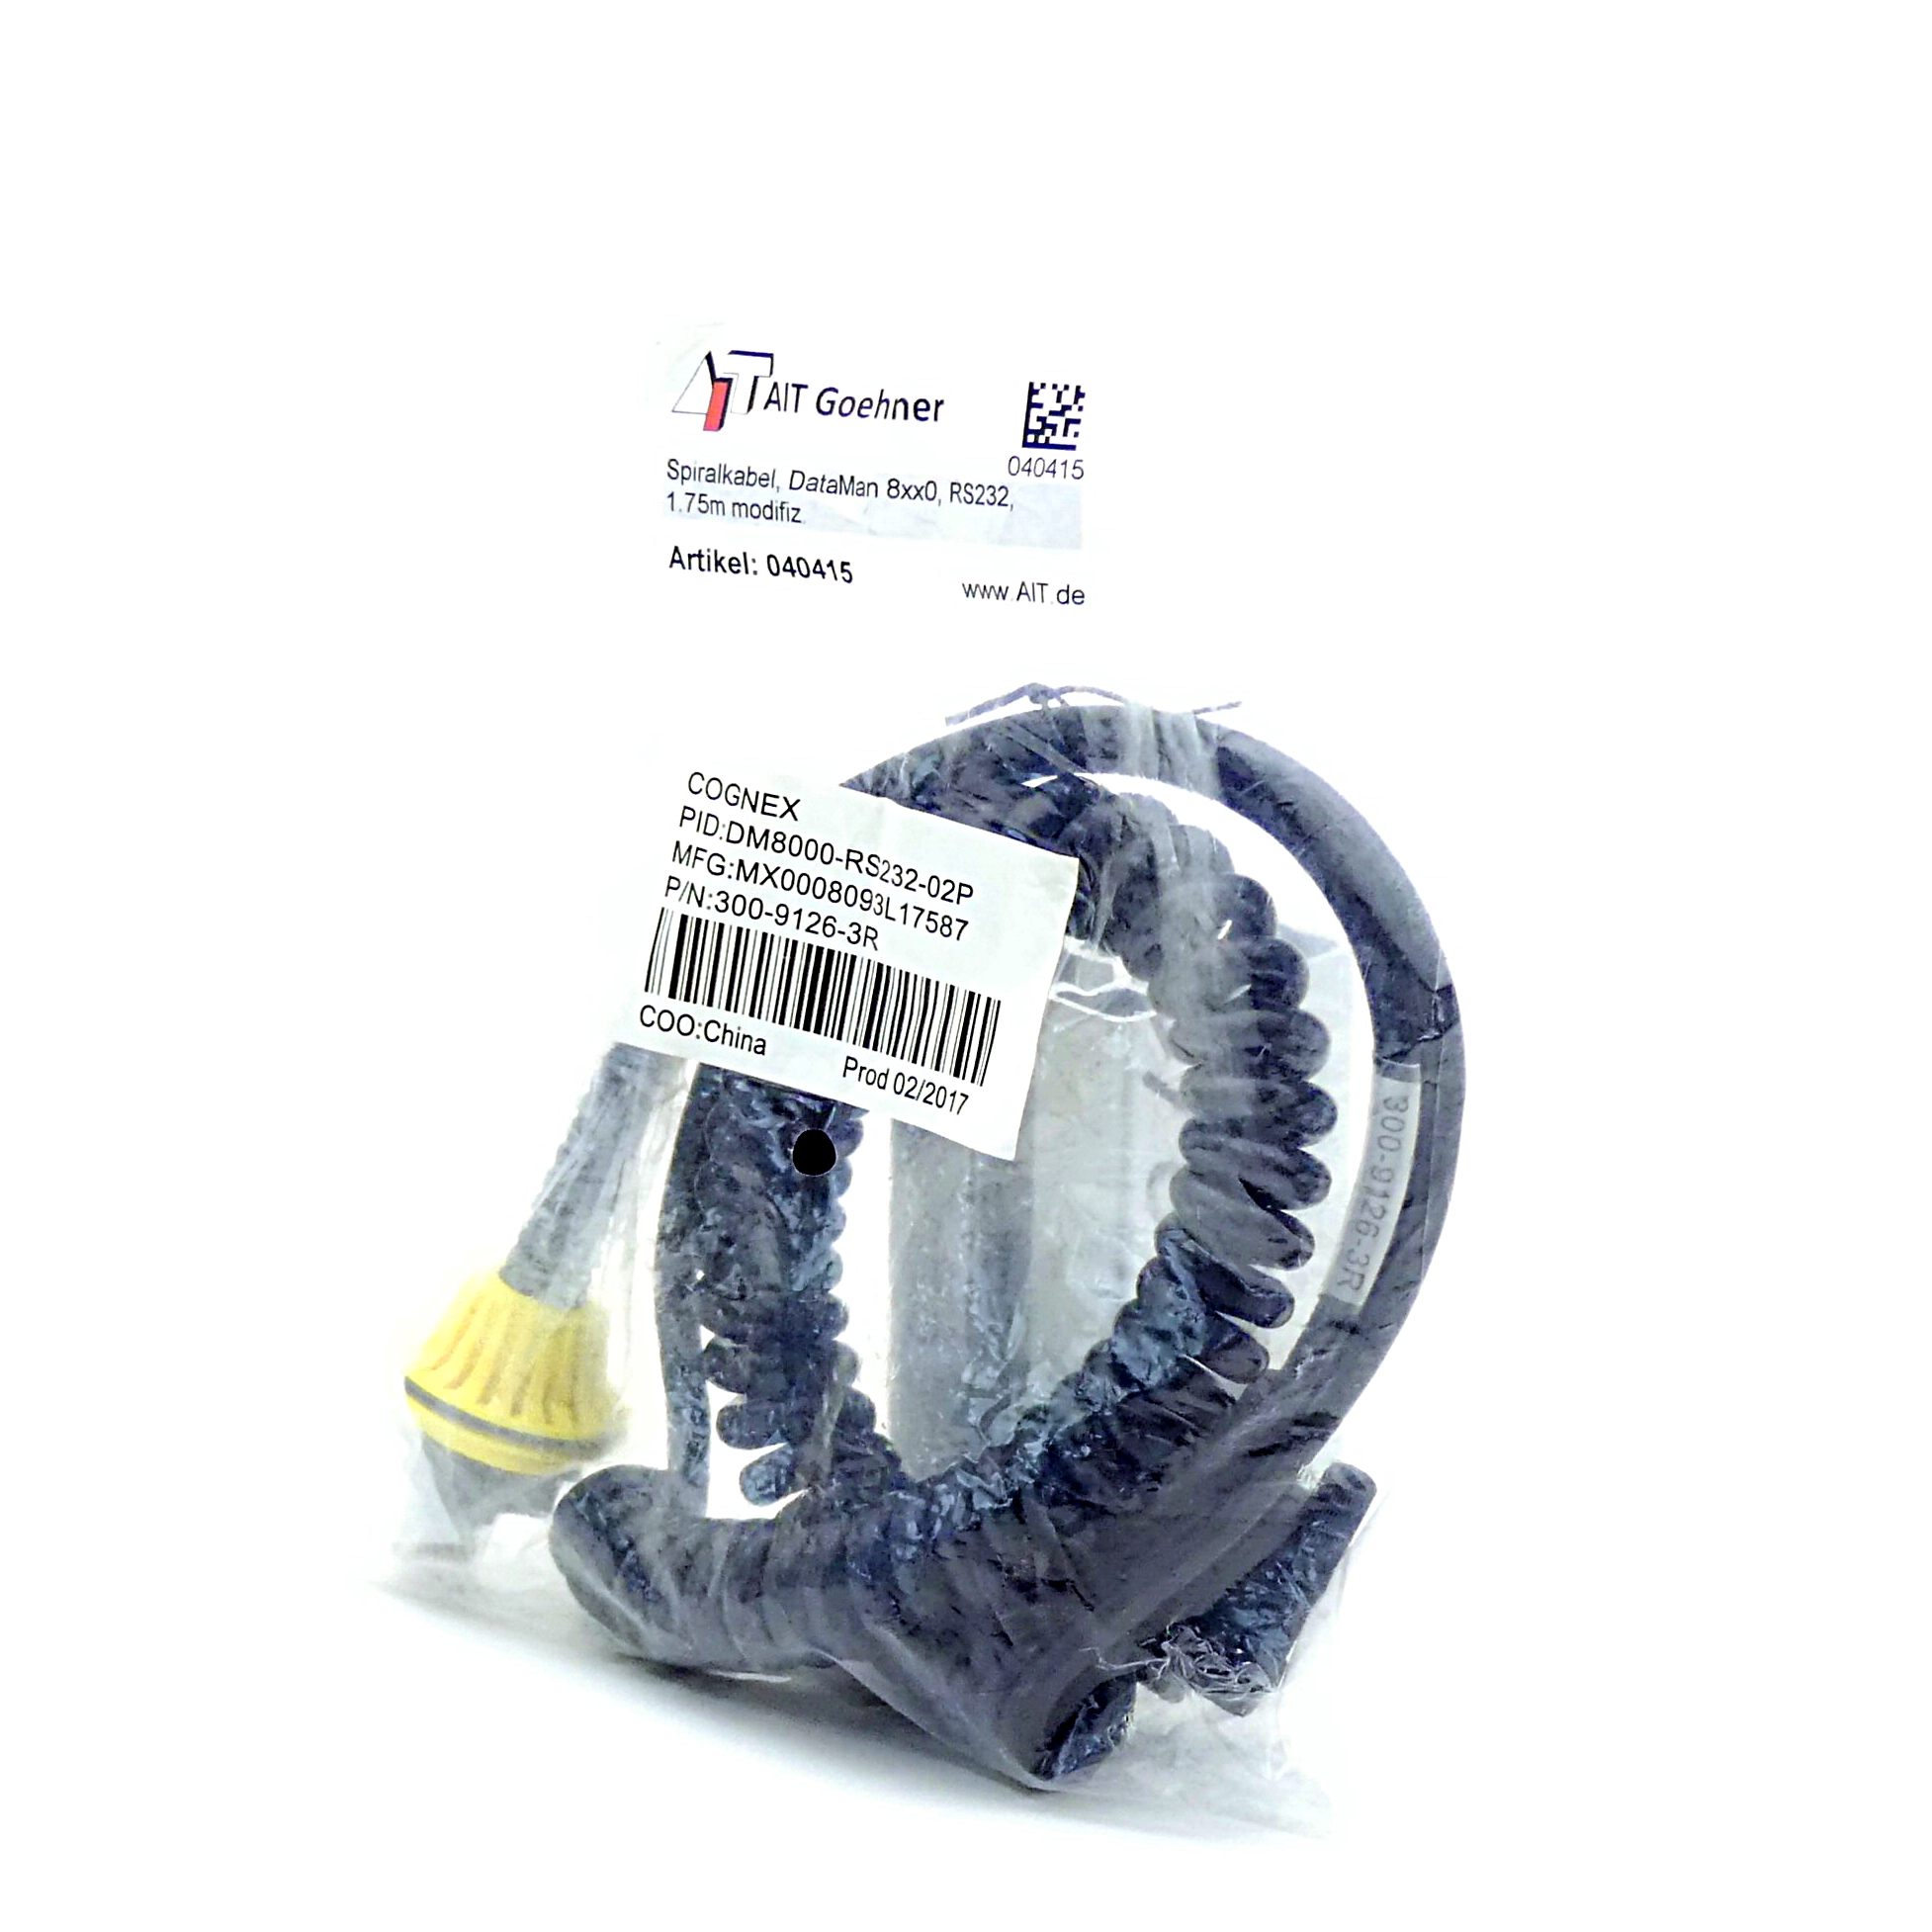 Spiral cable, DataMAn 8xx0, RS232, 1.75m 